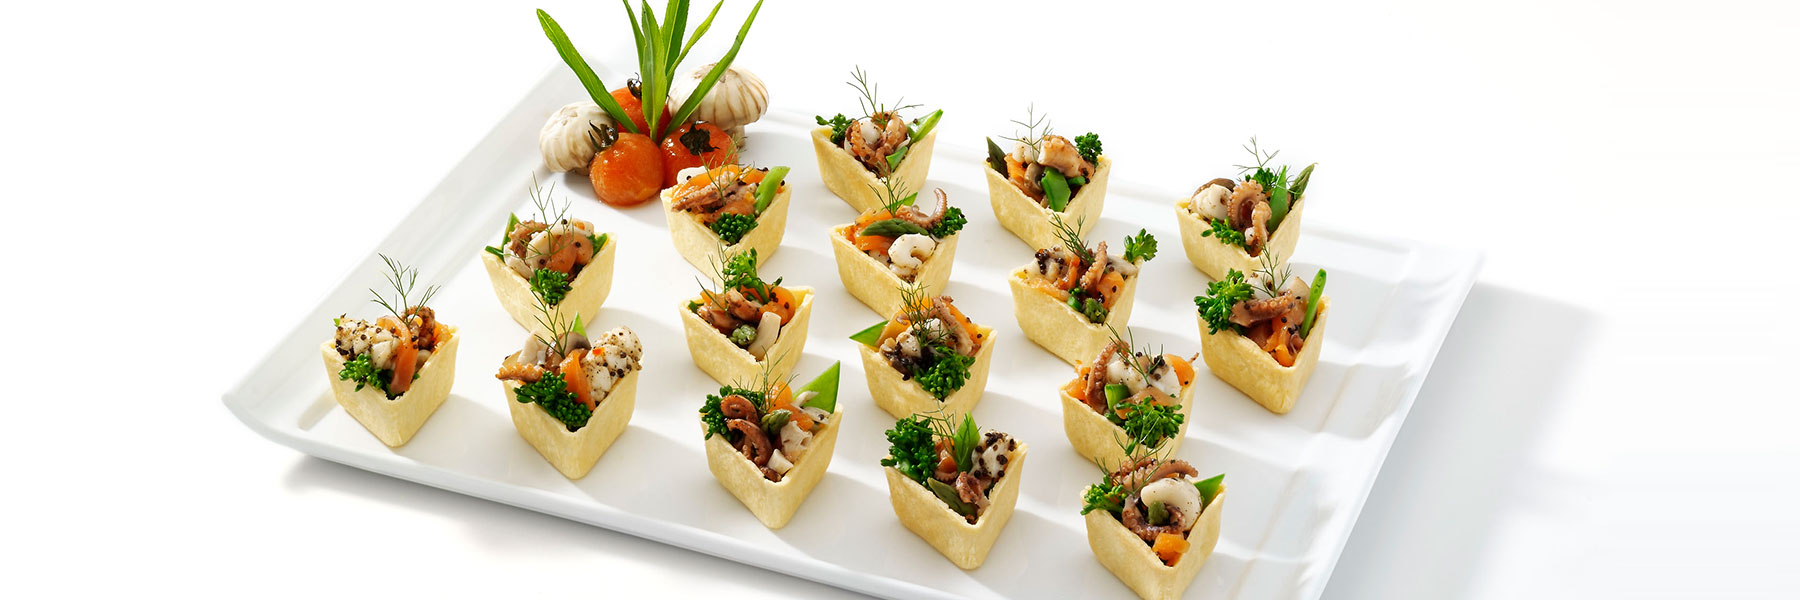 Summer savoury canape recipes for your next event.